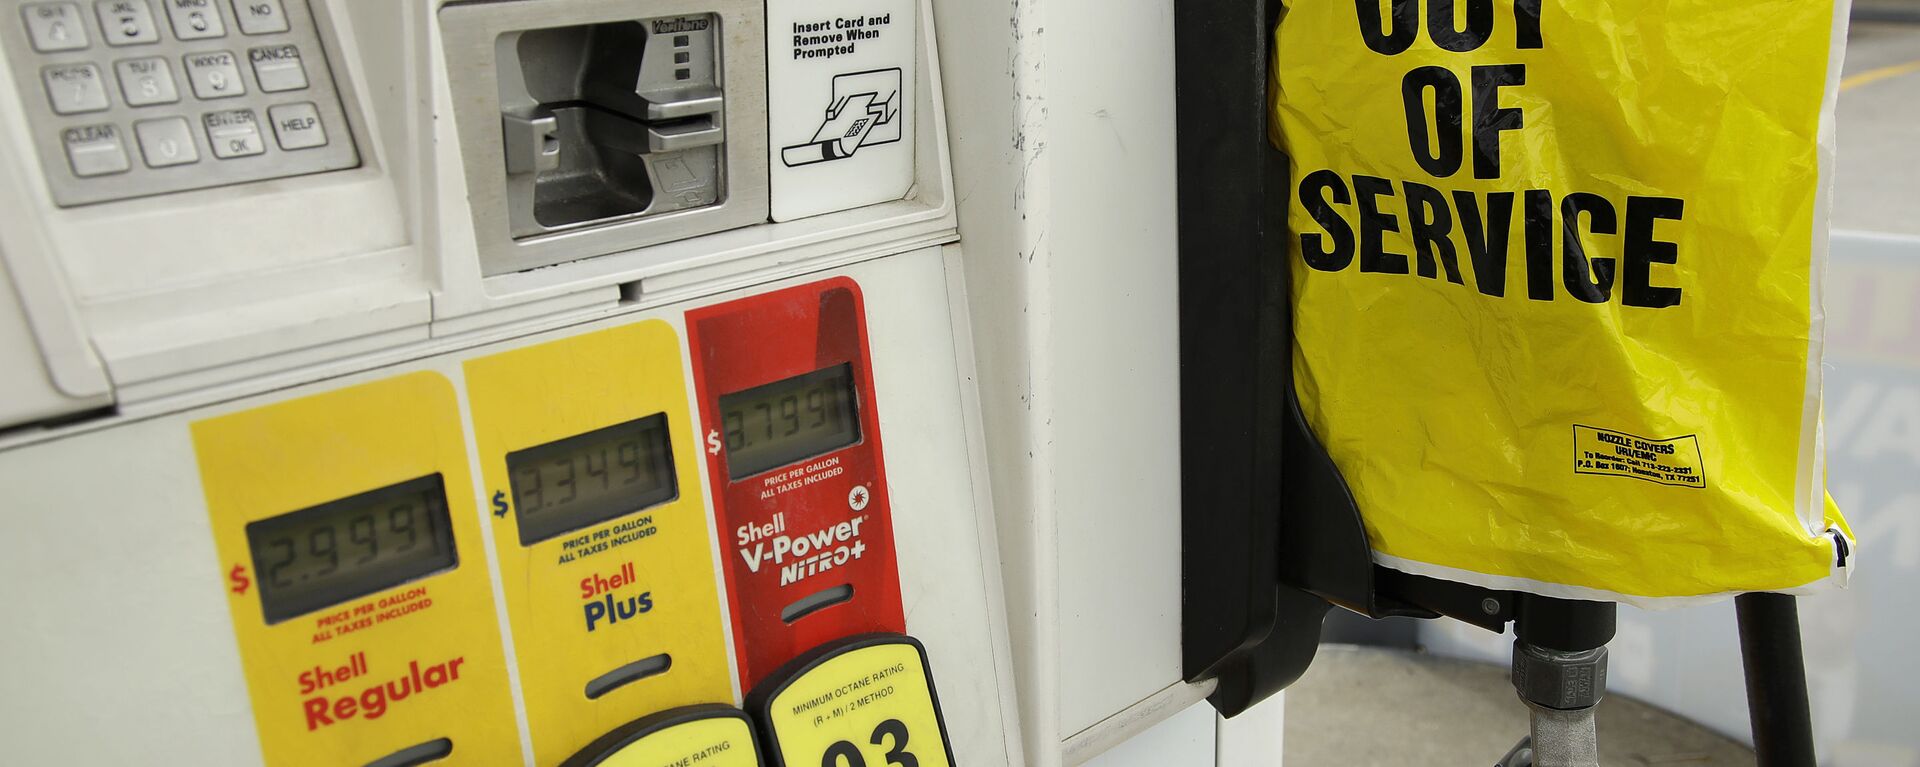 A gasoline station that ran out of gas for sale displays an out of service sign on the pump on Tuesday, May 11, 2021, in Atlanta. Gasoline futures are ticking higher following a cyberextortion attempt on the Colonial Pipeline, a vital U.S. pipeline that carries fuel from the Gulf Coast to the Northeast. - Sputnik International, 1920, 28.10.2021